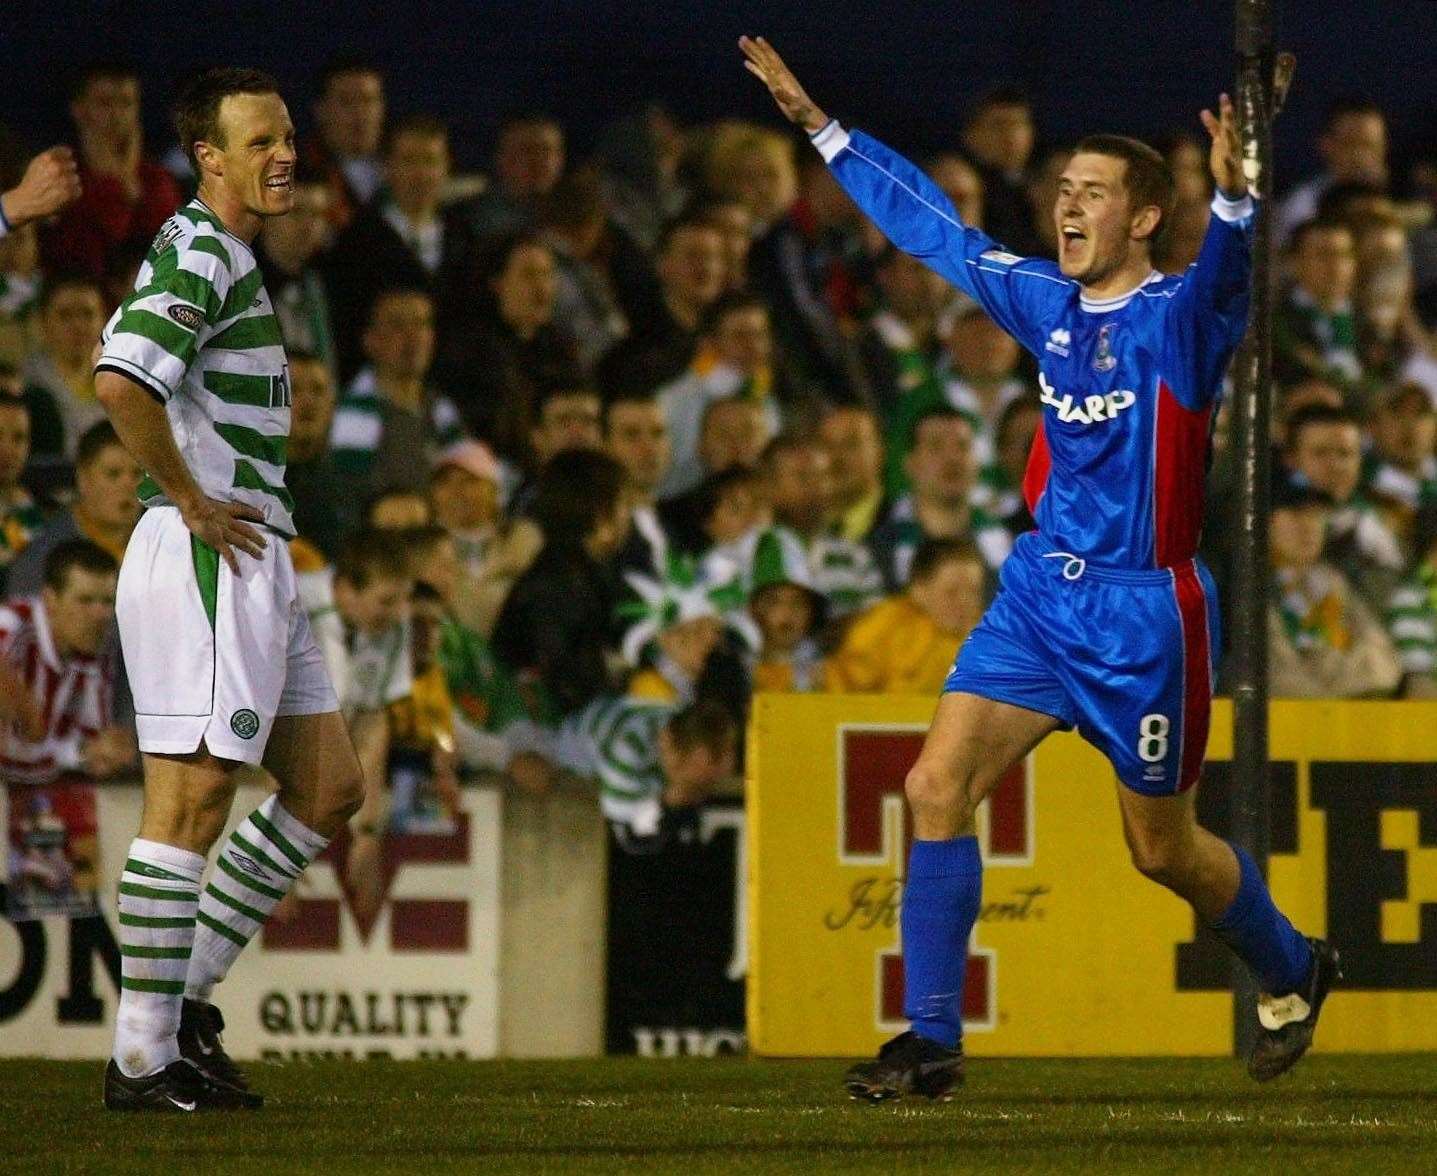 Caley Thistle went ballistic again three years after their original shock, beating Celtic in 2003 thanks to Dennis Wyness' winning goal. Picture: Ken Macpherson